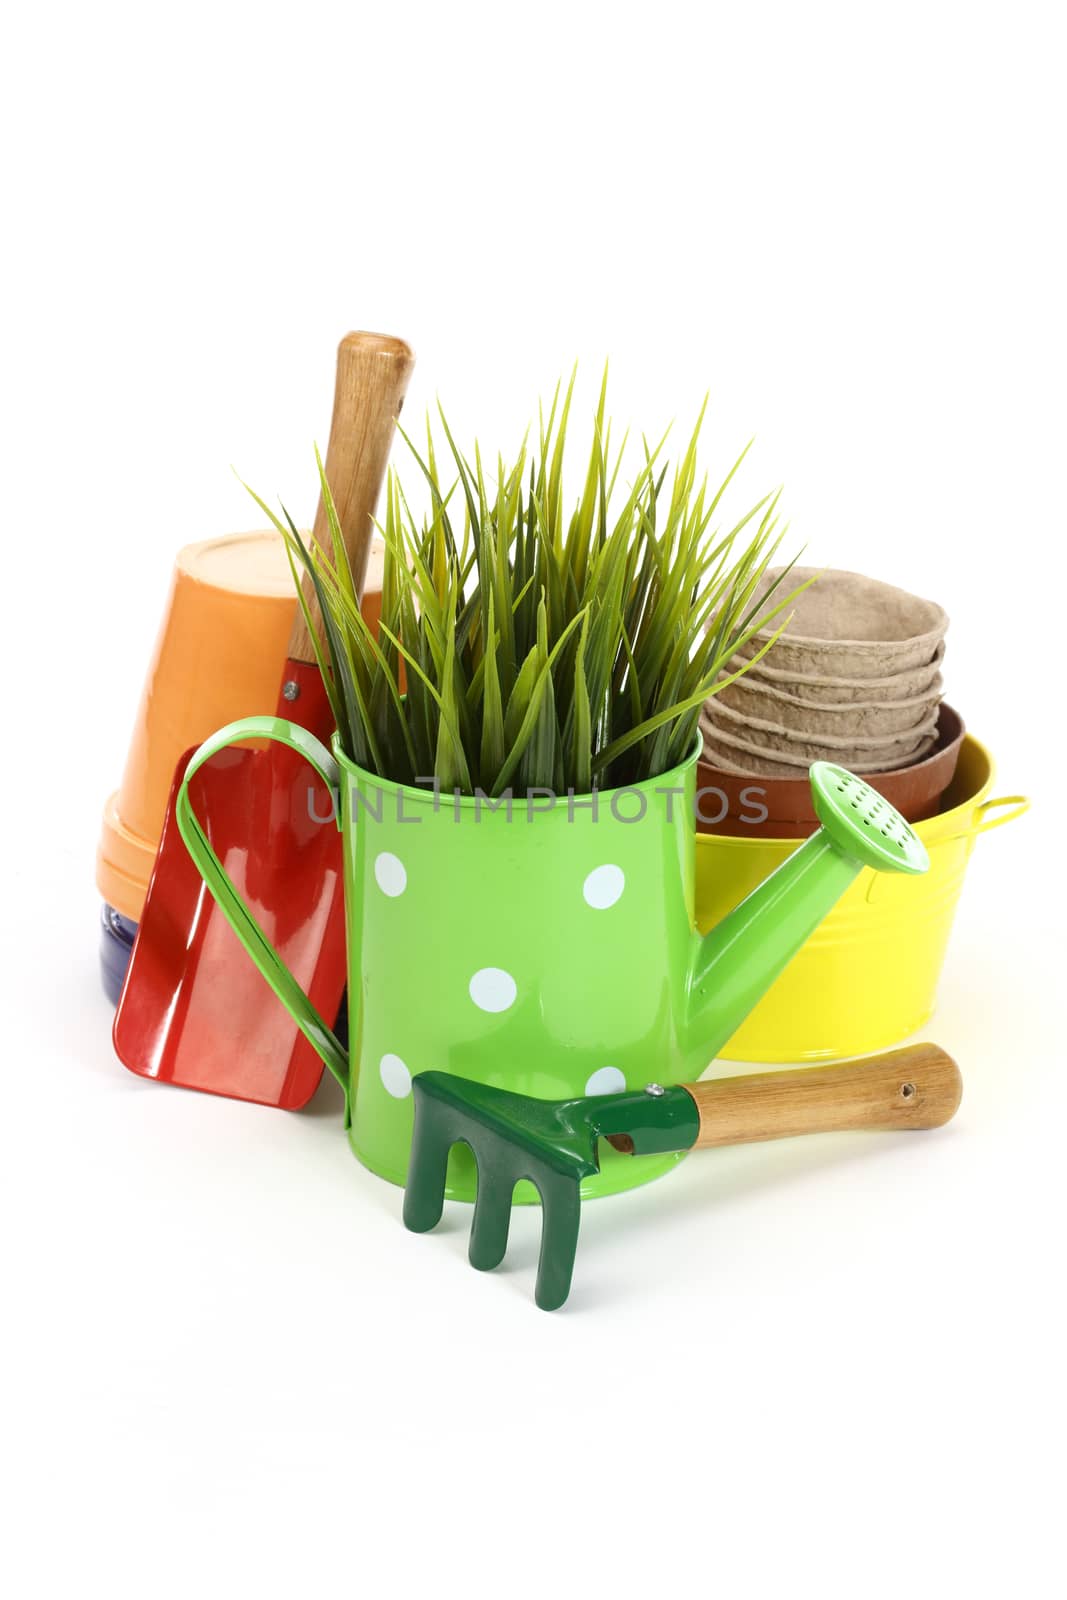 gardening tools and grass on white background 